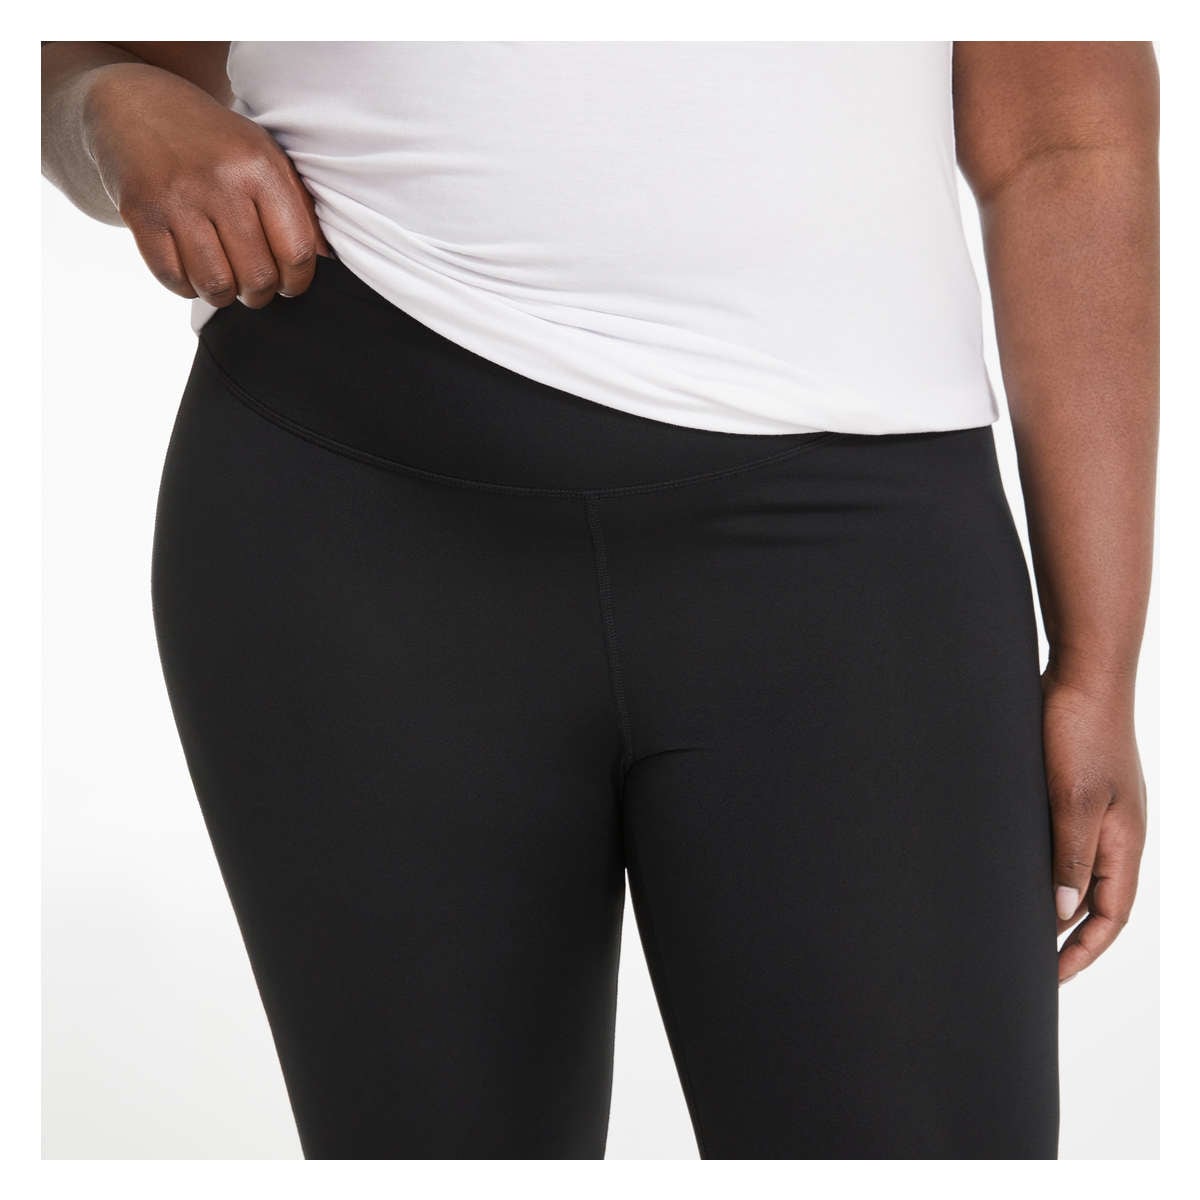 New! - Black Bow Suaded lightweight leggings - Size Small (6-8), Women's -  Bottoms, St. Catharines